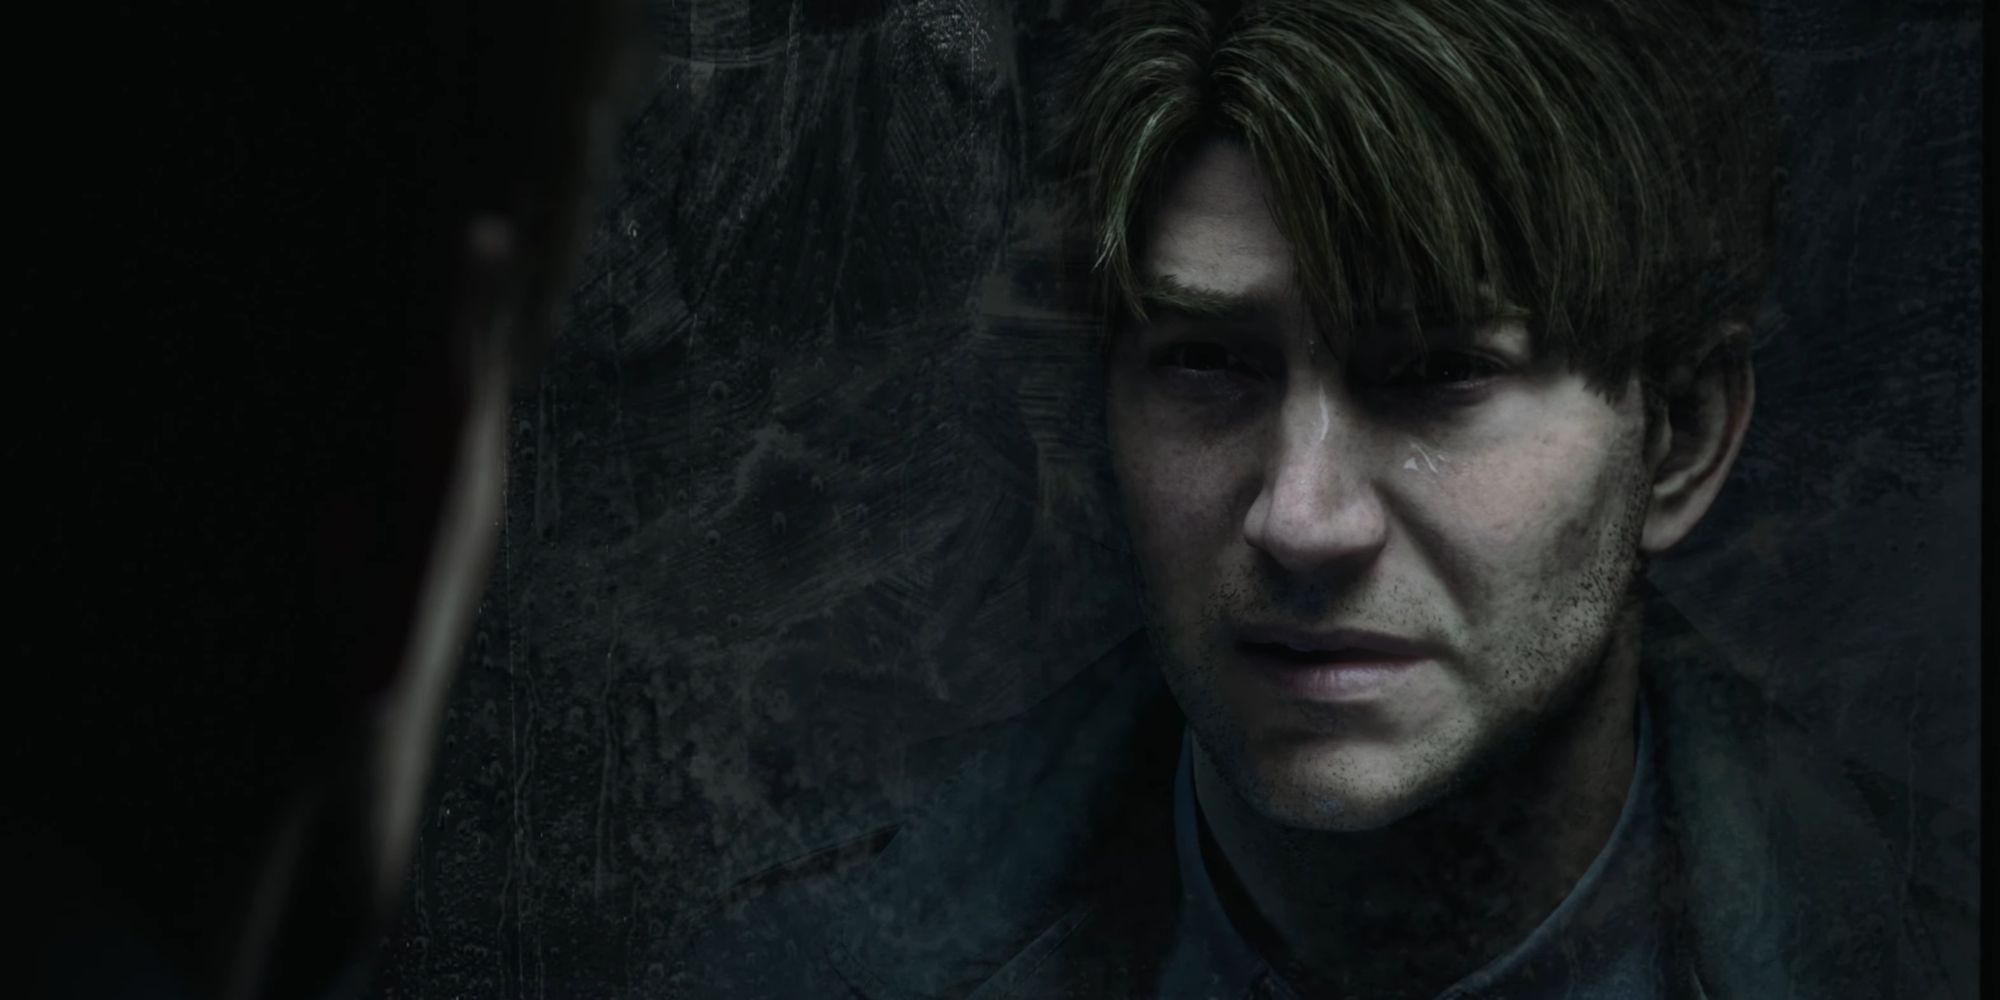 Every New Silent Hill Game Coming In 2023 & Beyond